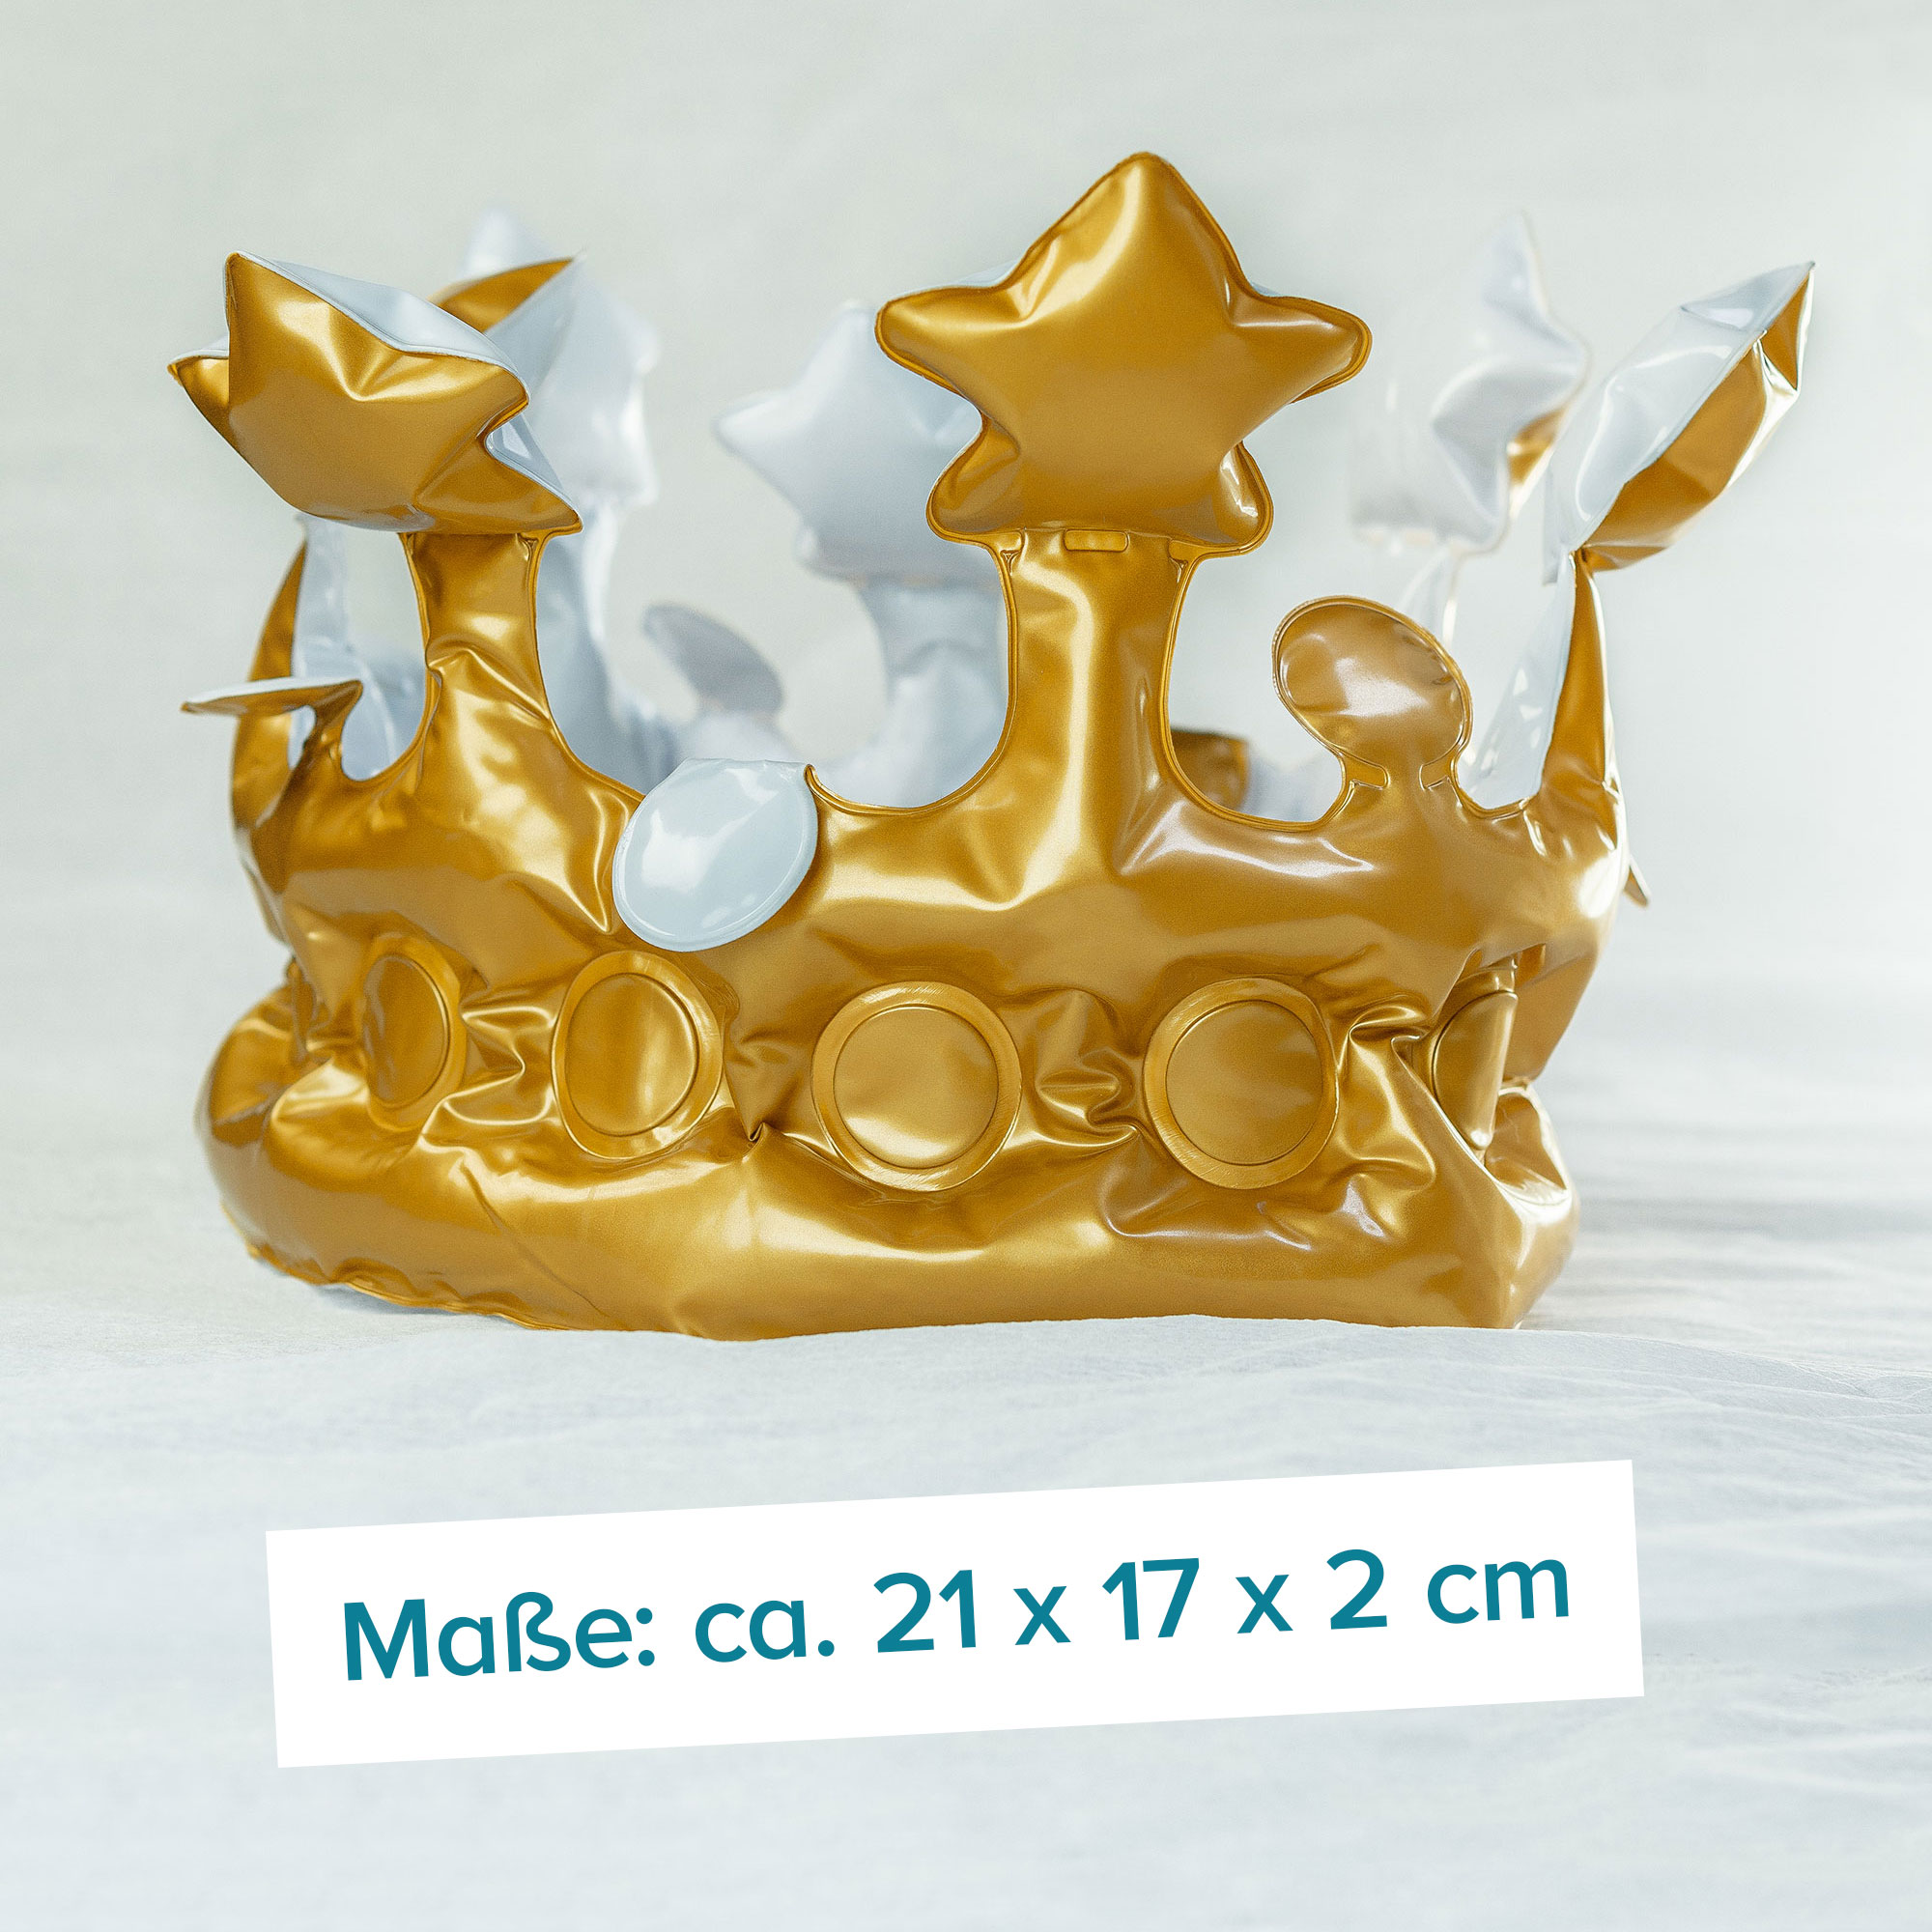 Loot Crate Exclusive Metallic Gold Inflatable Crown 